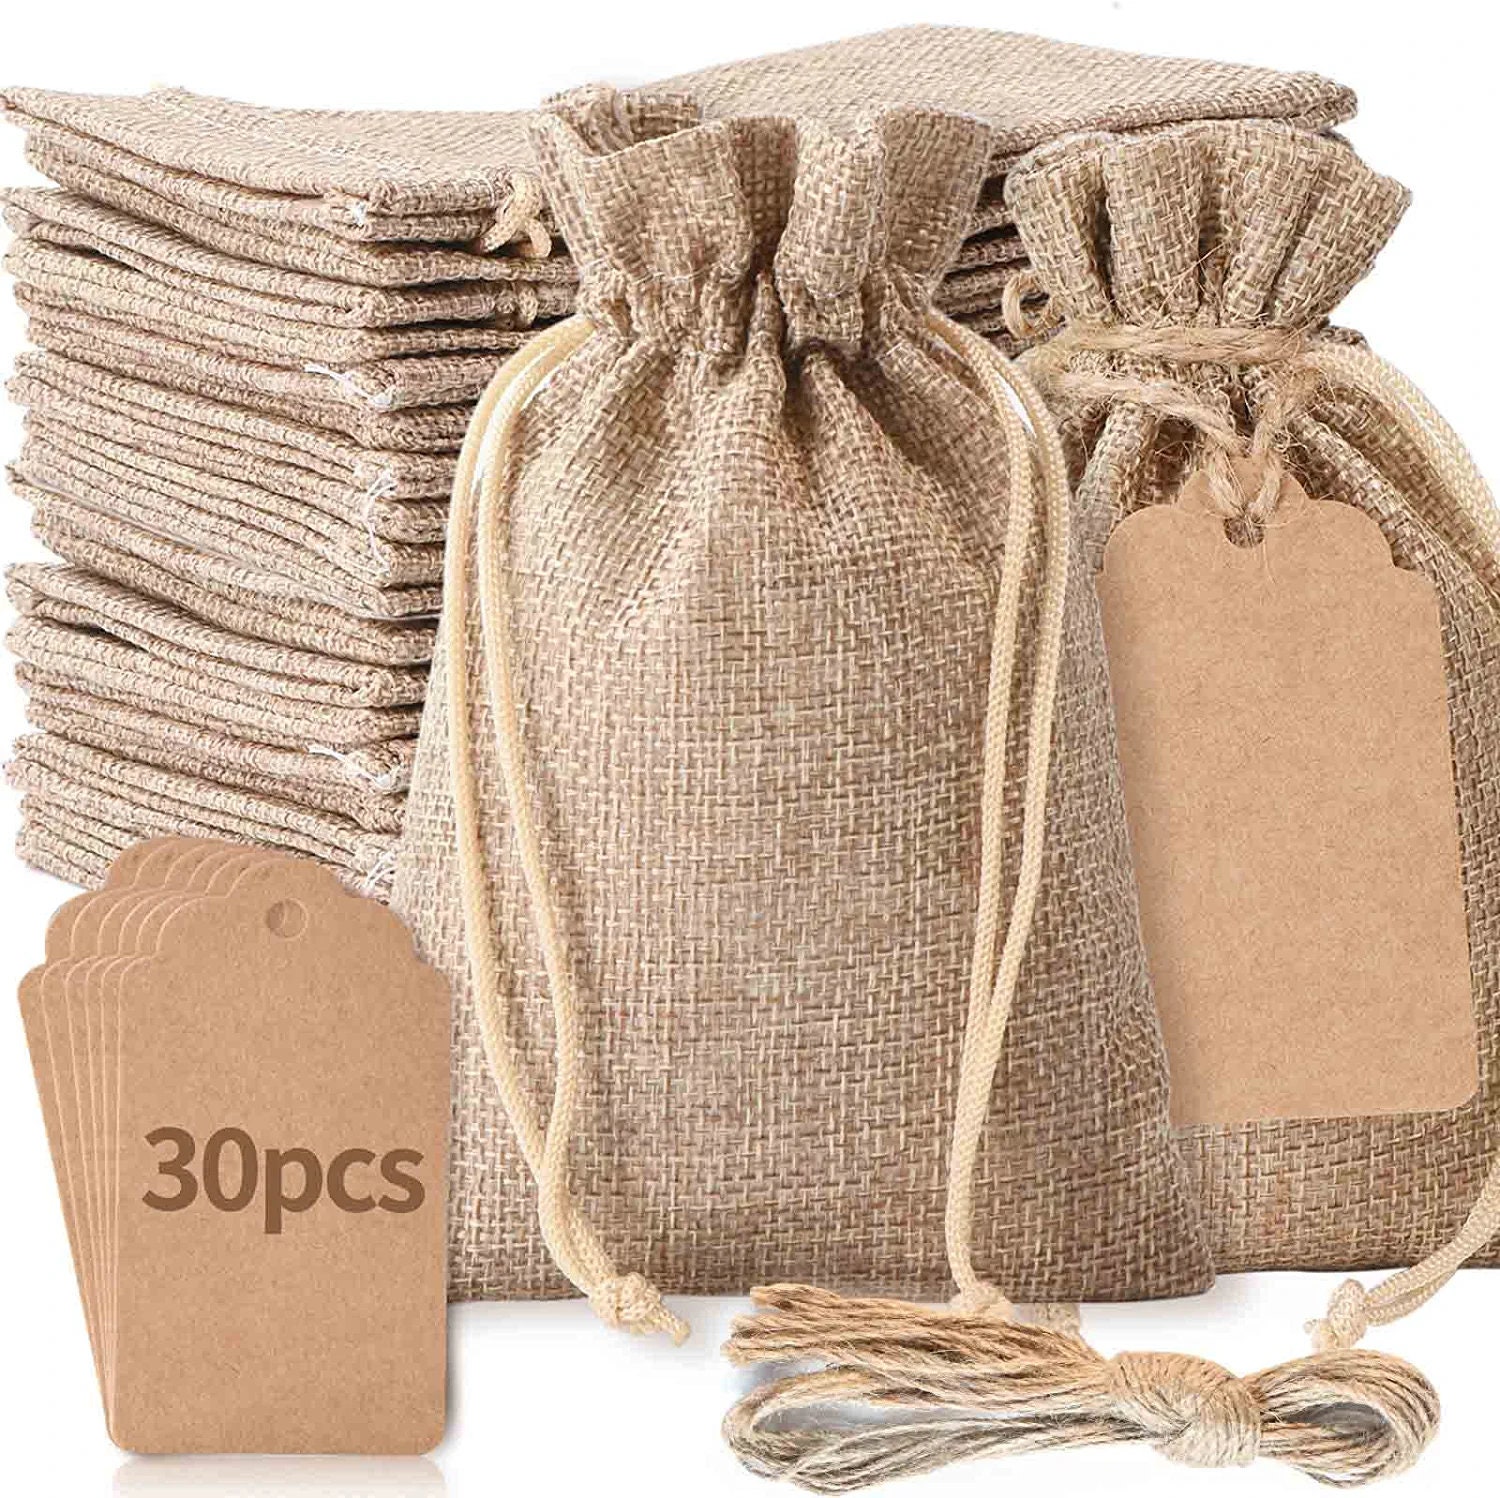 50x Burlap Bags with Drawstring by Kona Kift 5x75 Small Party Favor Gift  Bags  Bonus Gift Tags  String Brown Bags Bulk Small Size for Birthday  Bag Craft Bags Or Party